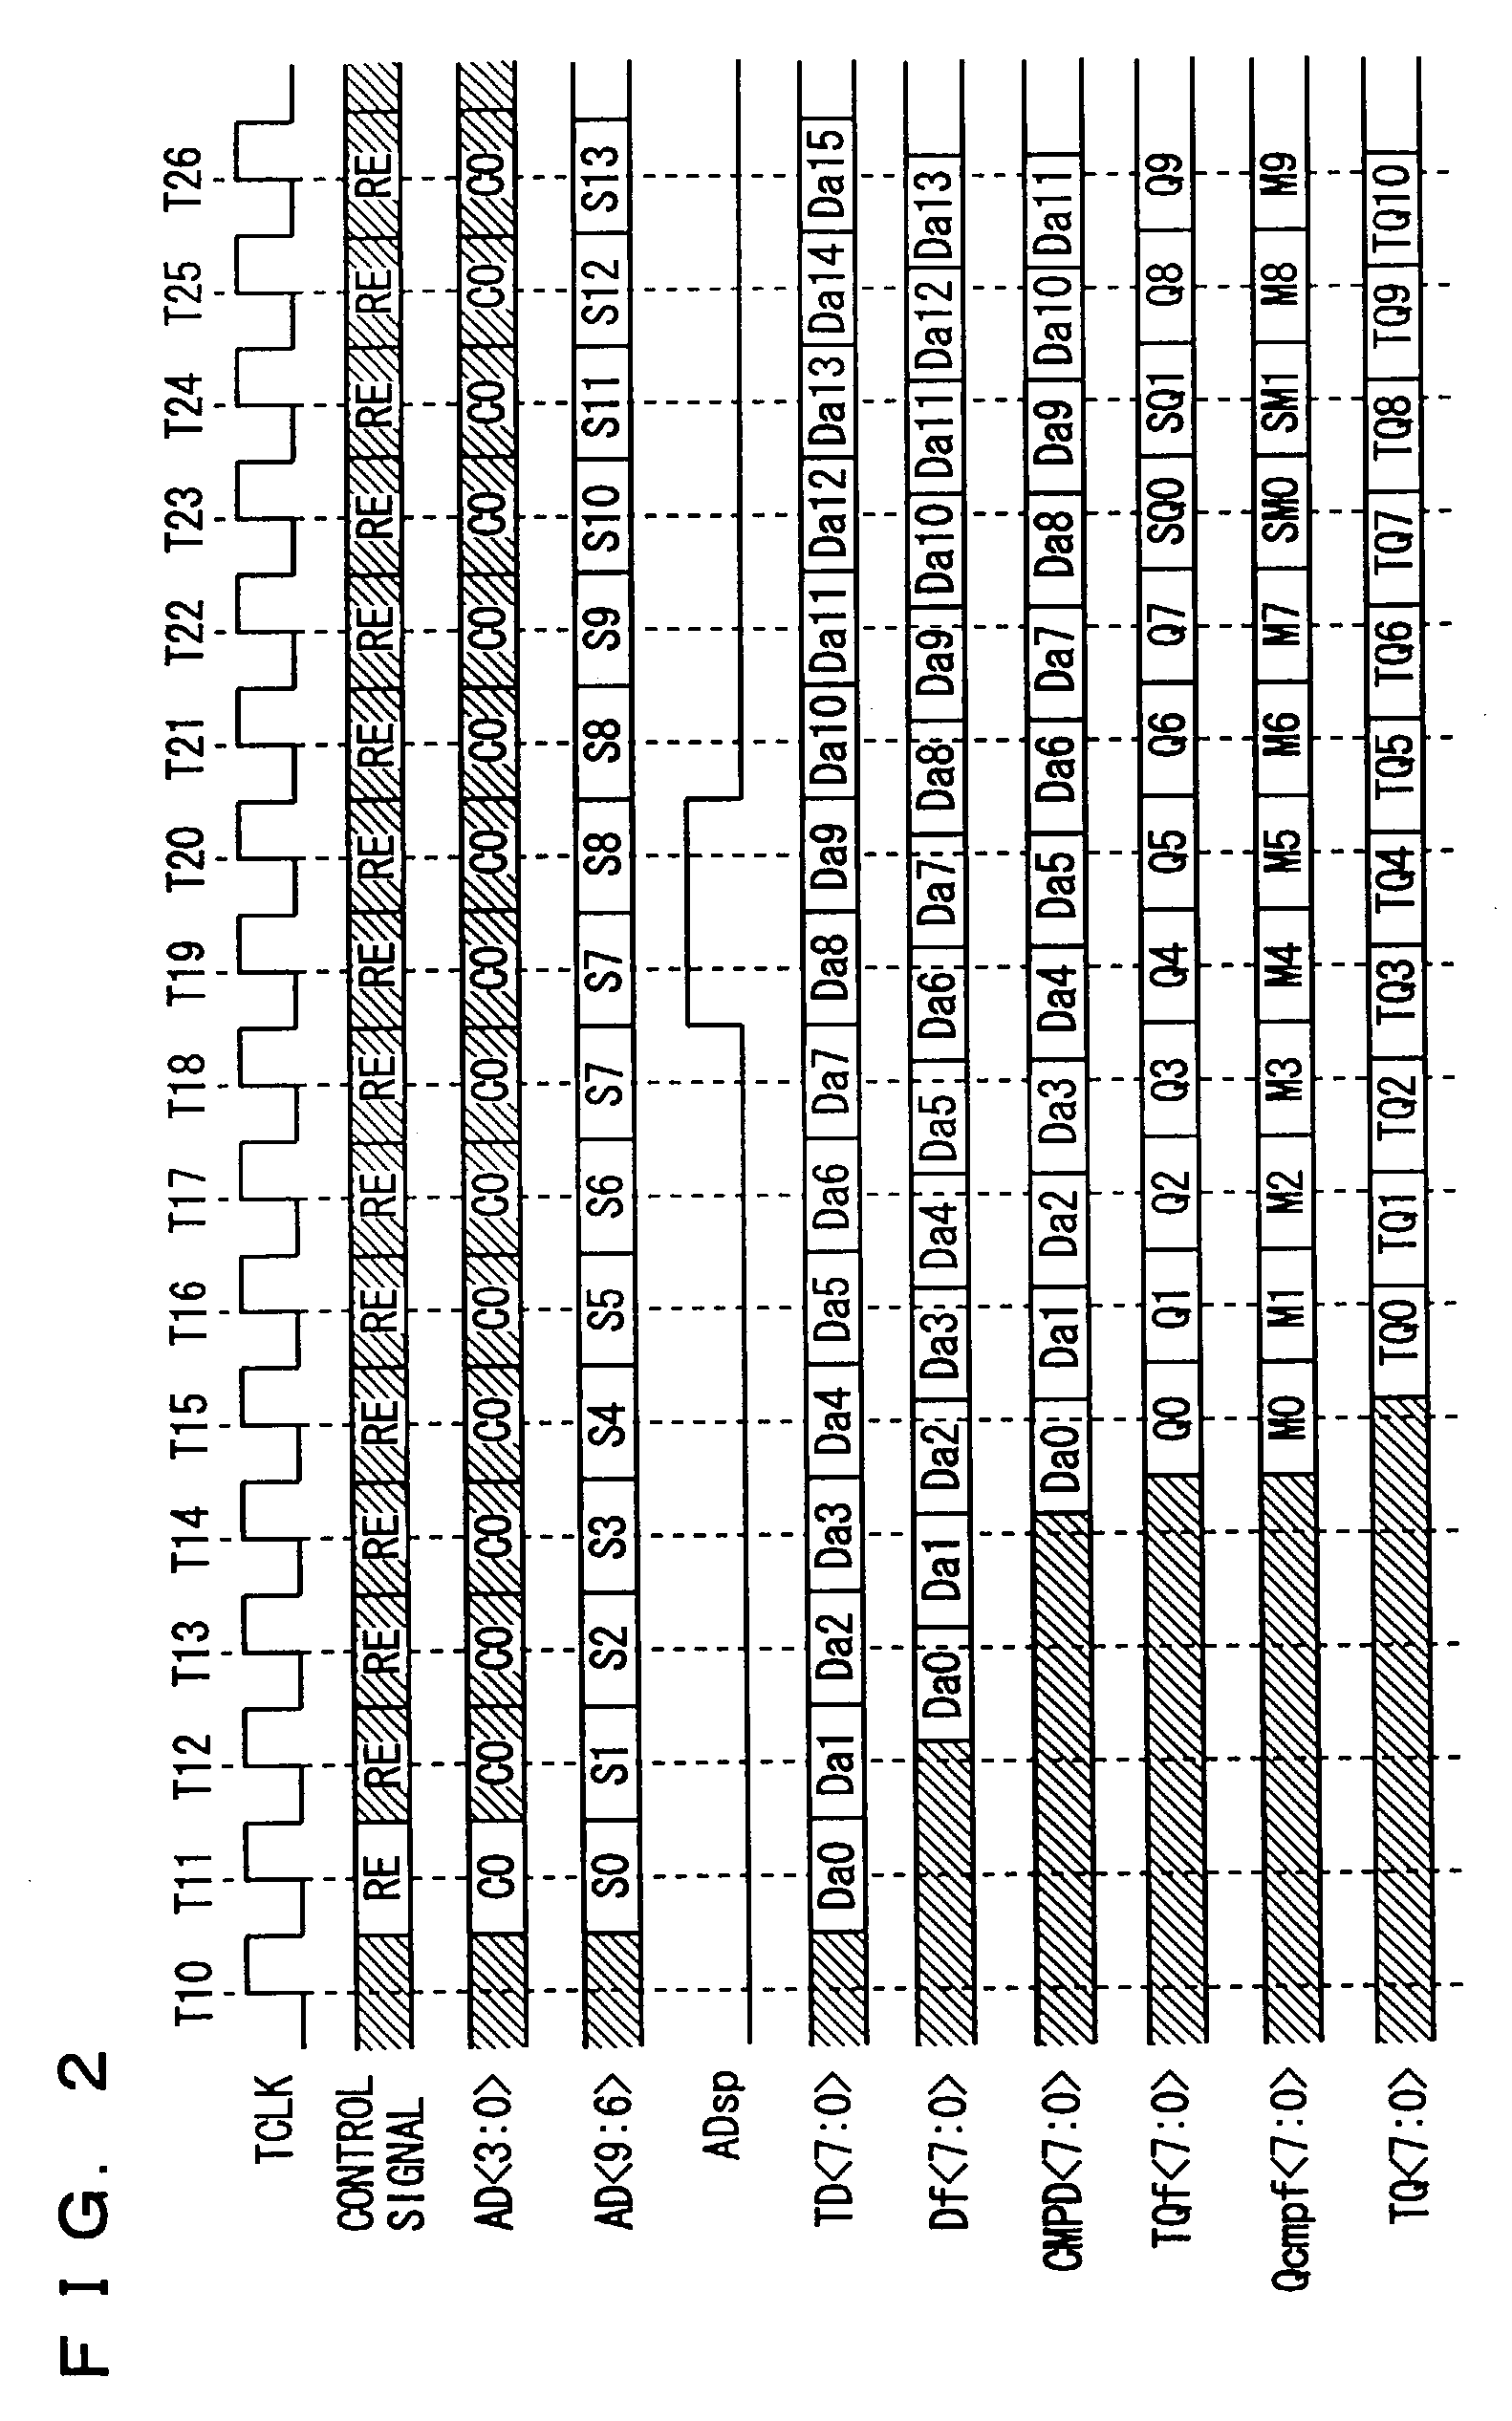 Semiconductor integrated circuit device with test data output nodes for parallel test results output